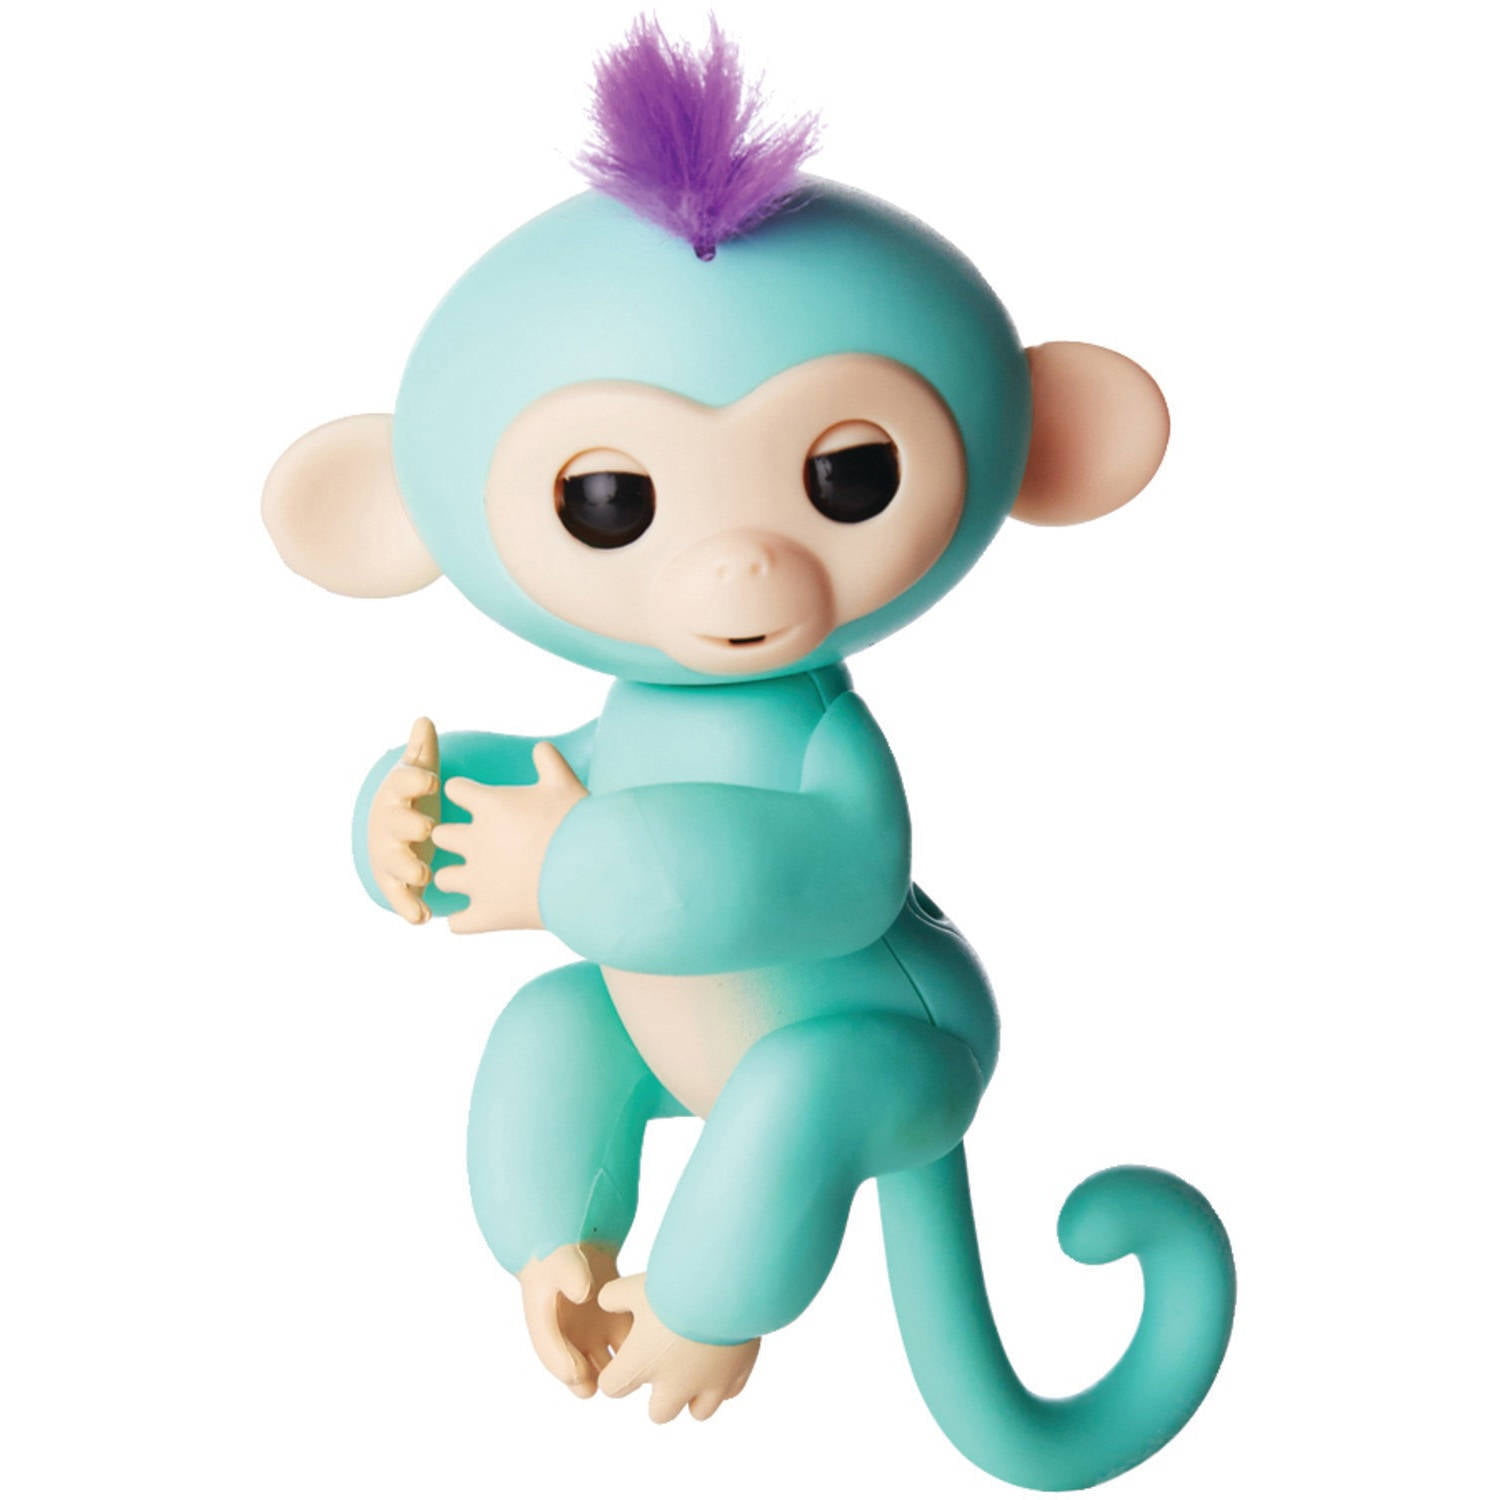 Turquoise Fingerling 2-Pack Includes Mia Purple and Zoe Includes Bonus Stand for Each 